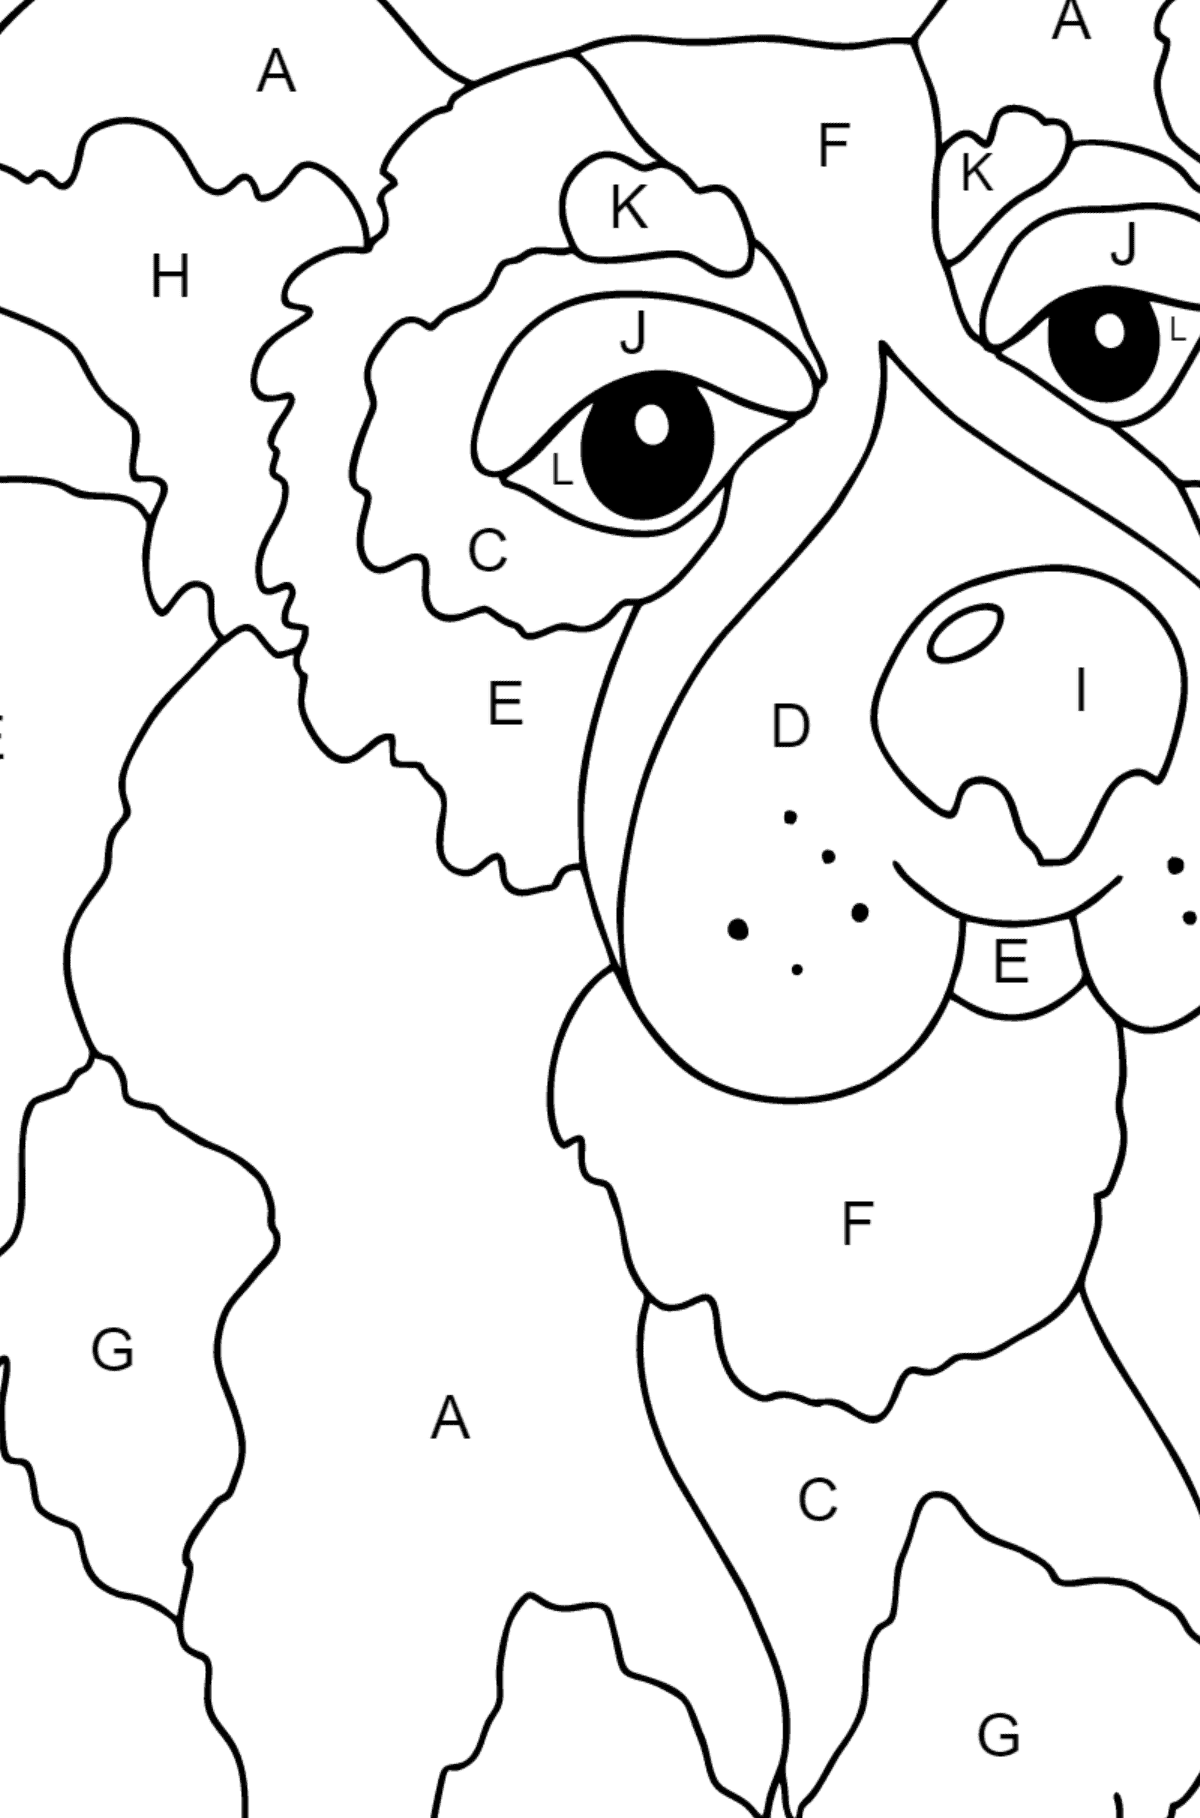 Coloring Page - A Dog is Playing with a Ball for Kids  - Color by Letters